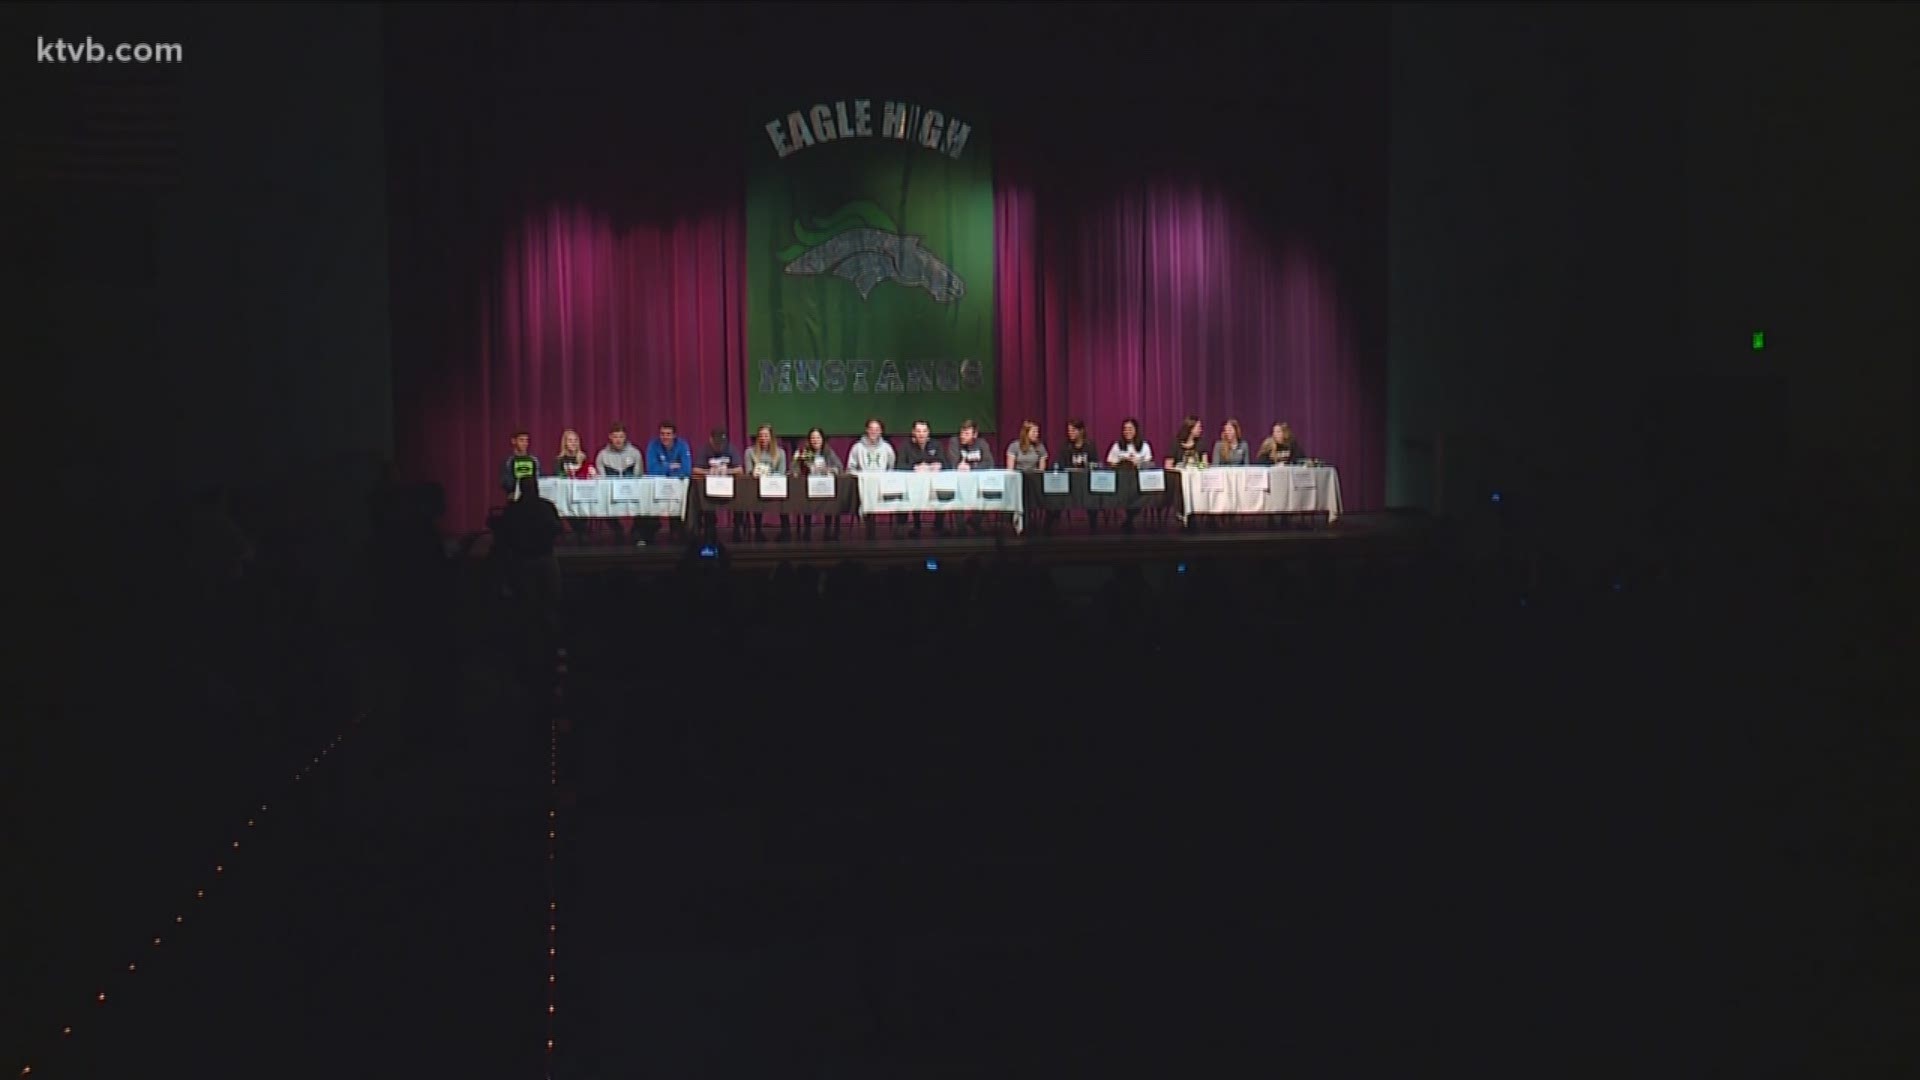 2018 Eagle High School signing day